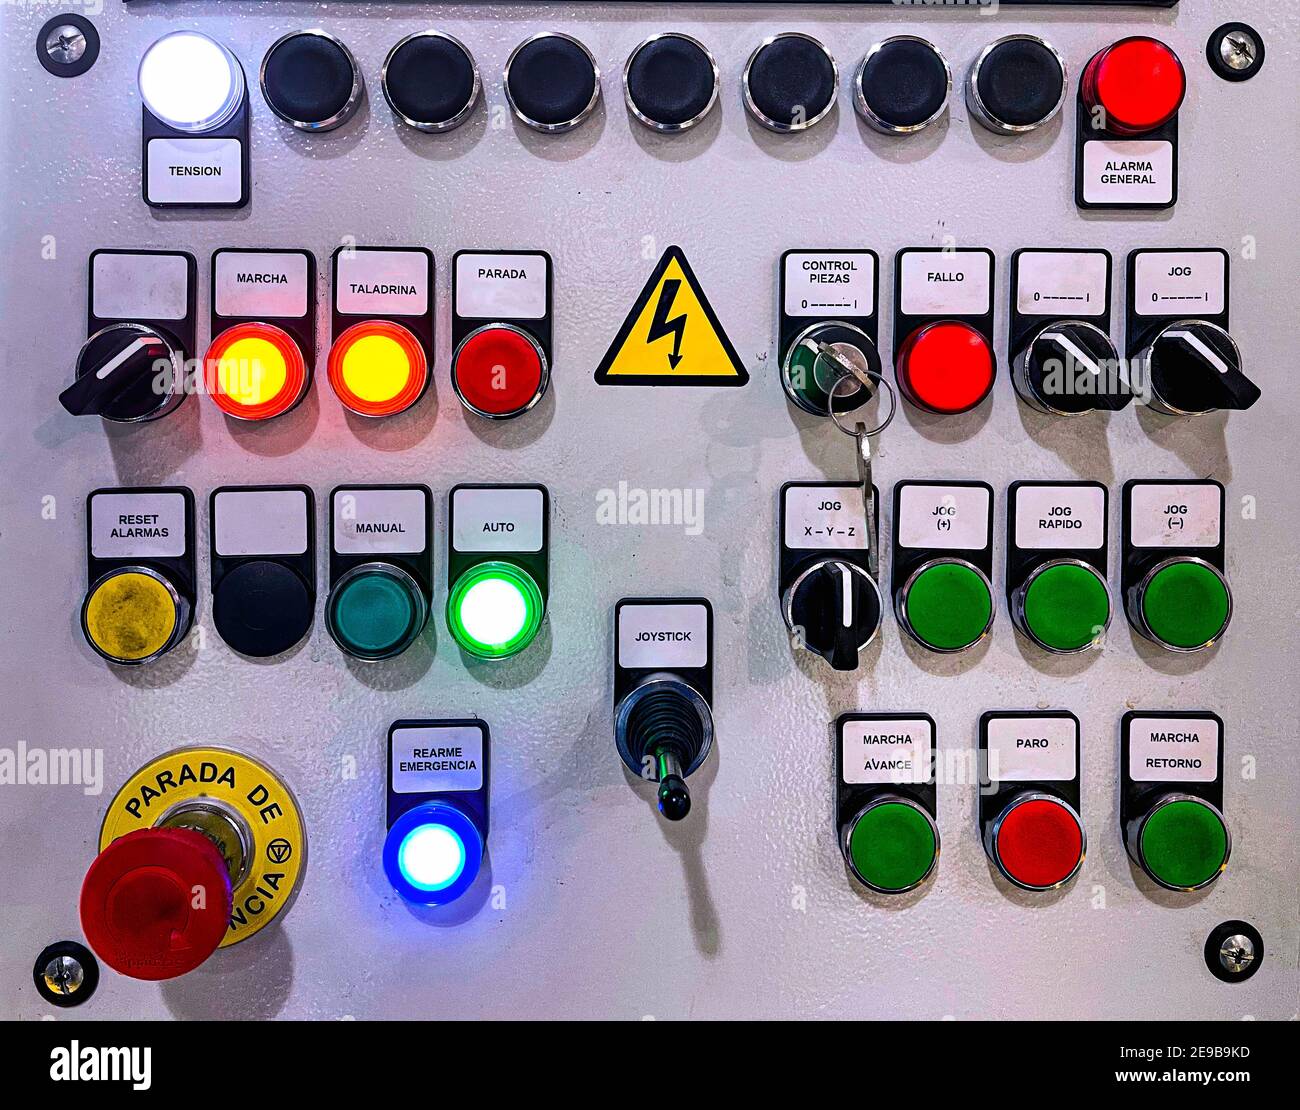 button panel of the control panel of a machine with different push buttons and selectors, emergency stop and colored alarm lights, high tension Stock Photo